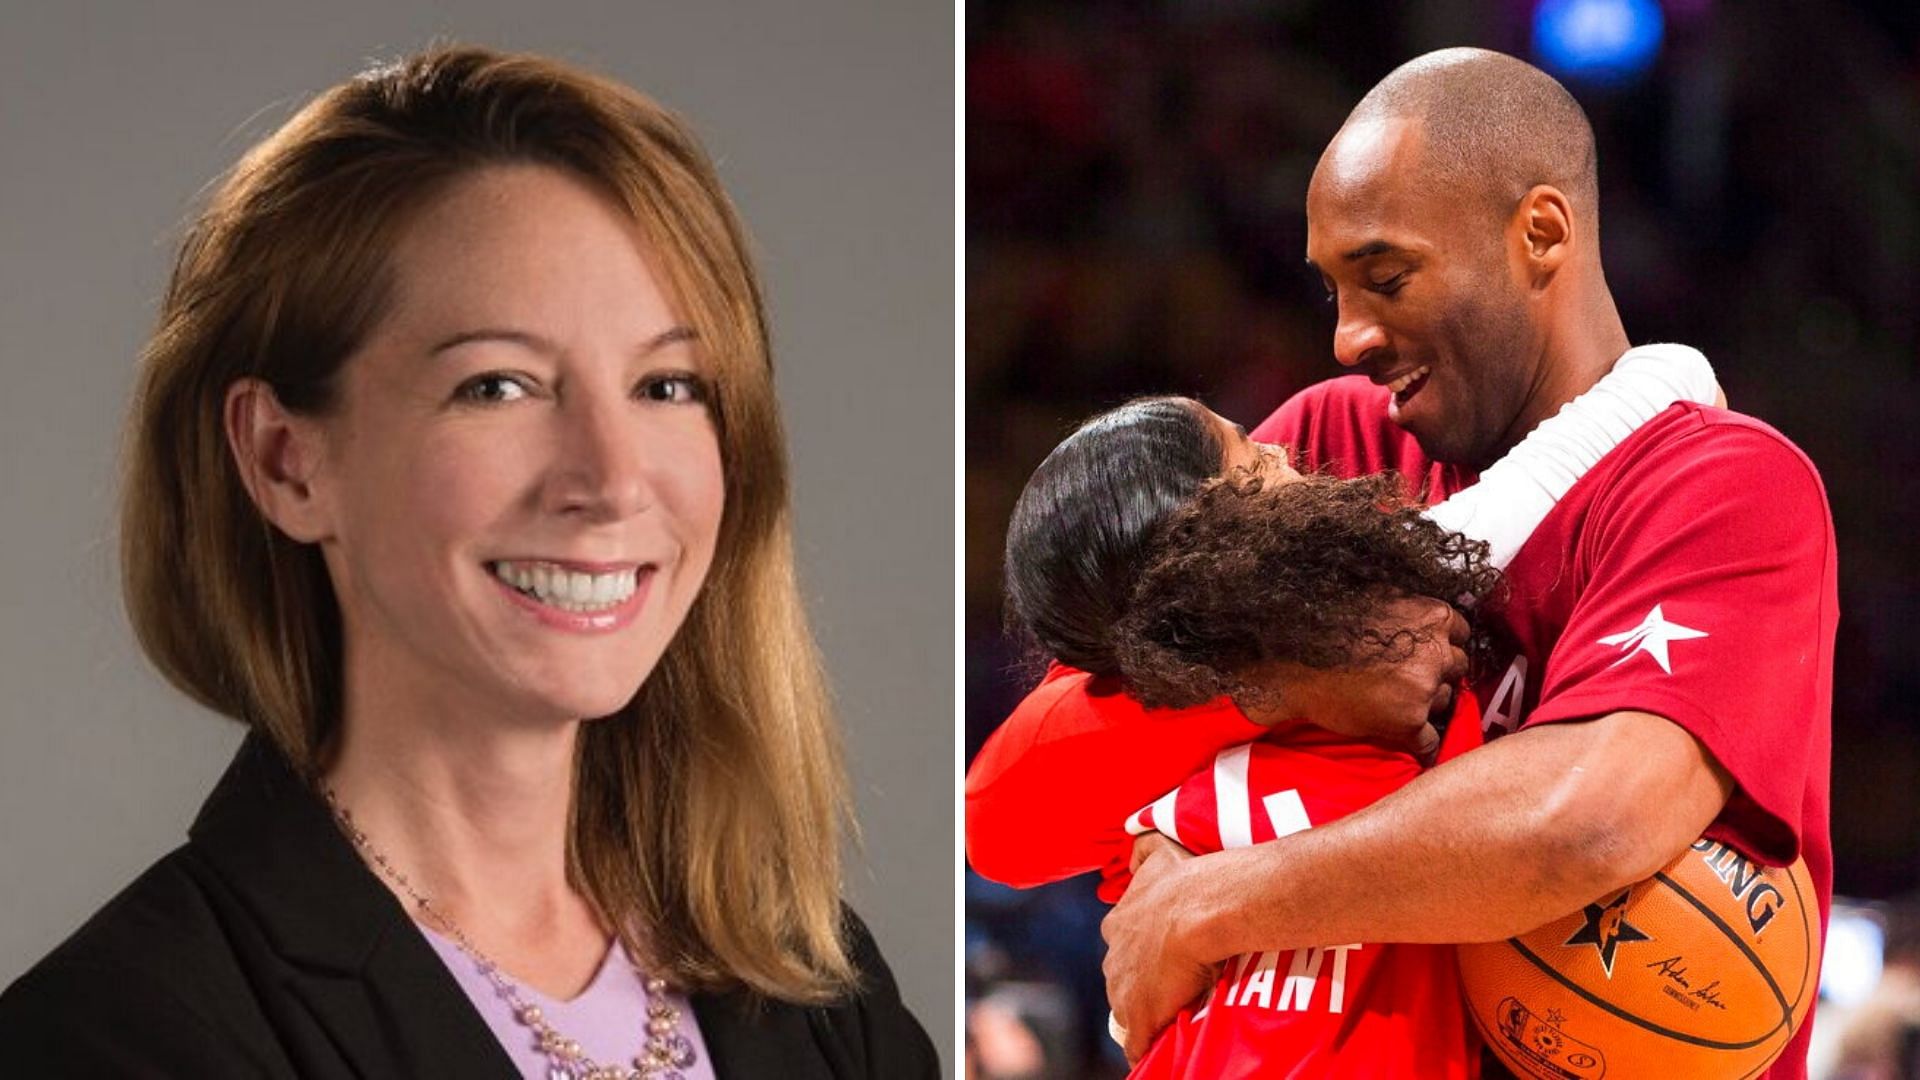 The Washington Post on Monday, 27 January, suspended reporter Felicia Sonmez (left) after she tweeted about the 2003 rape case against basketball legend Kobe Bryant (right).